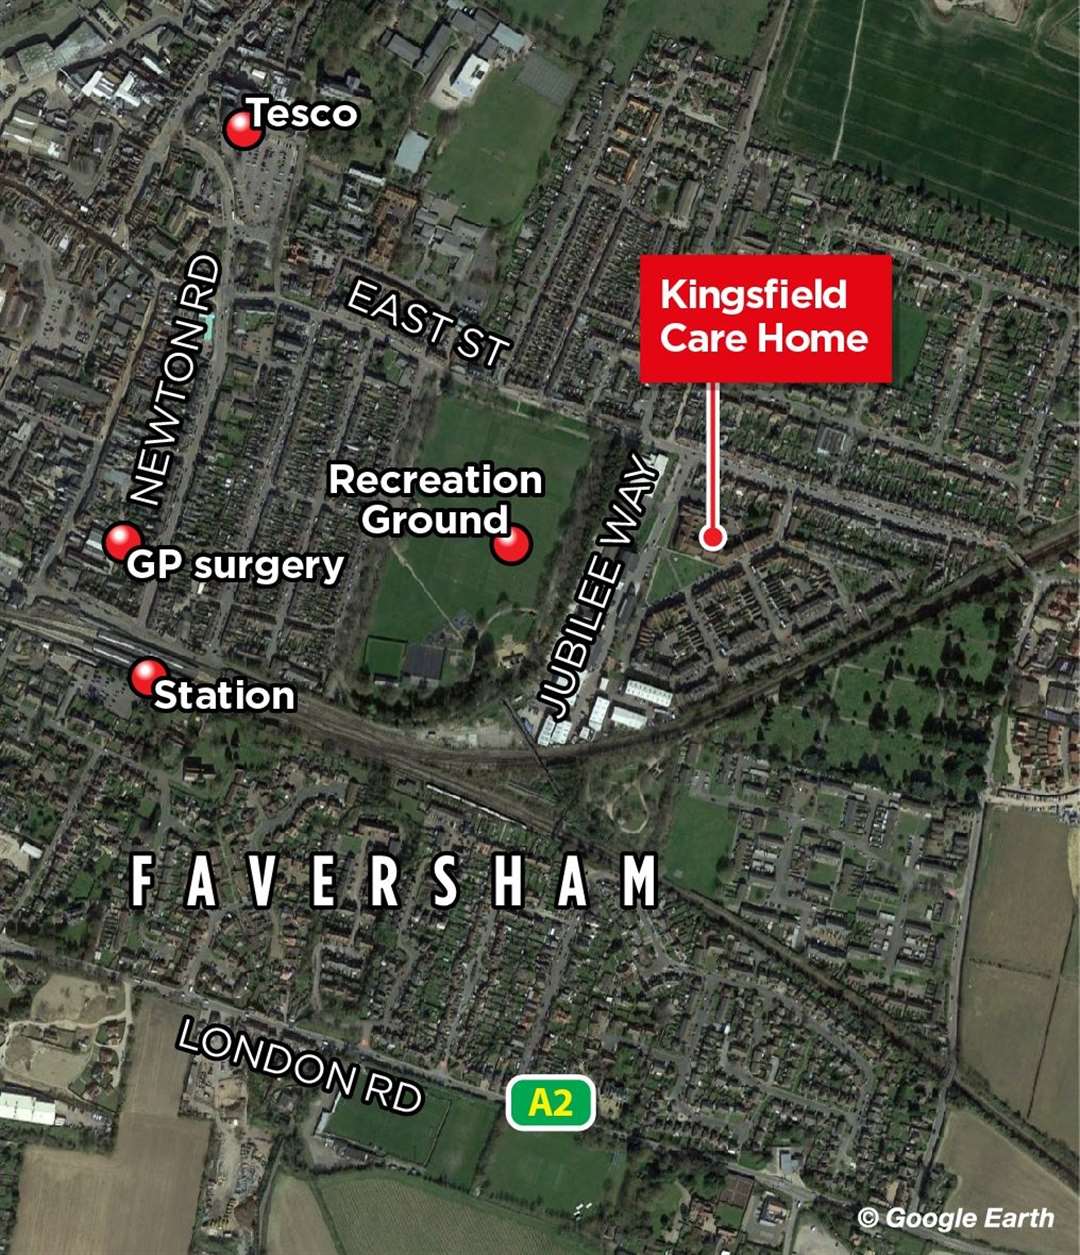 Kingsfield Care Centre sits very close to the heart of Faversham